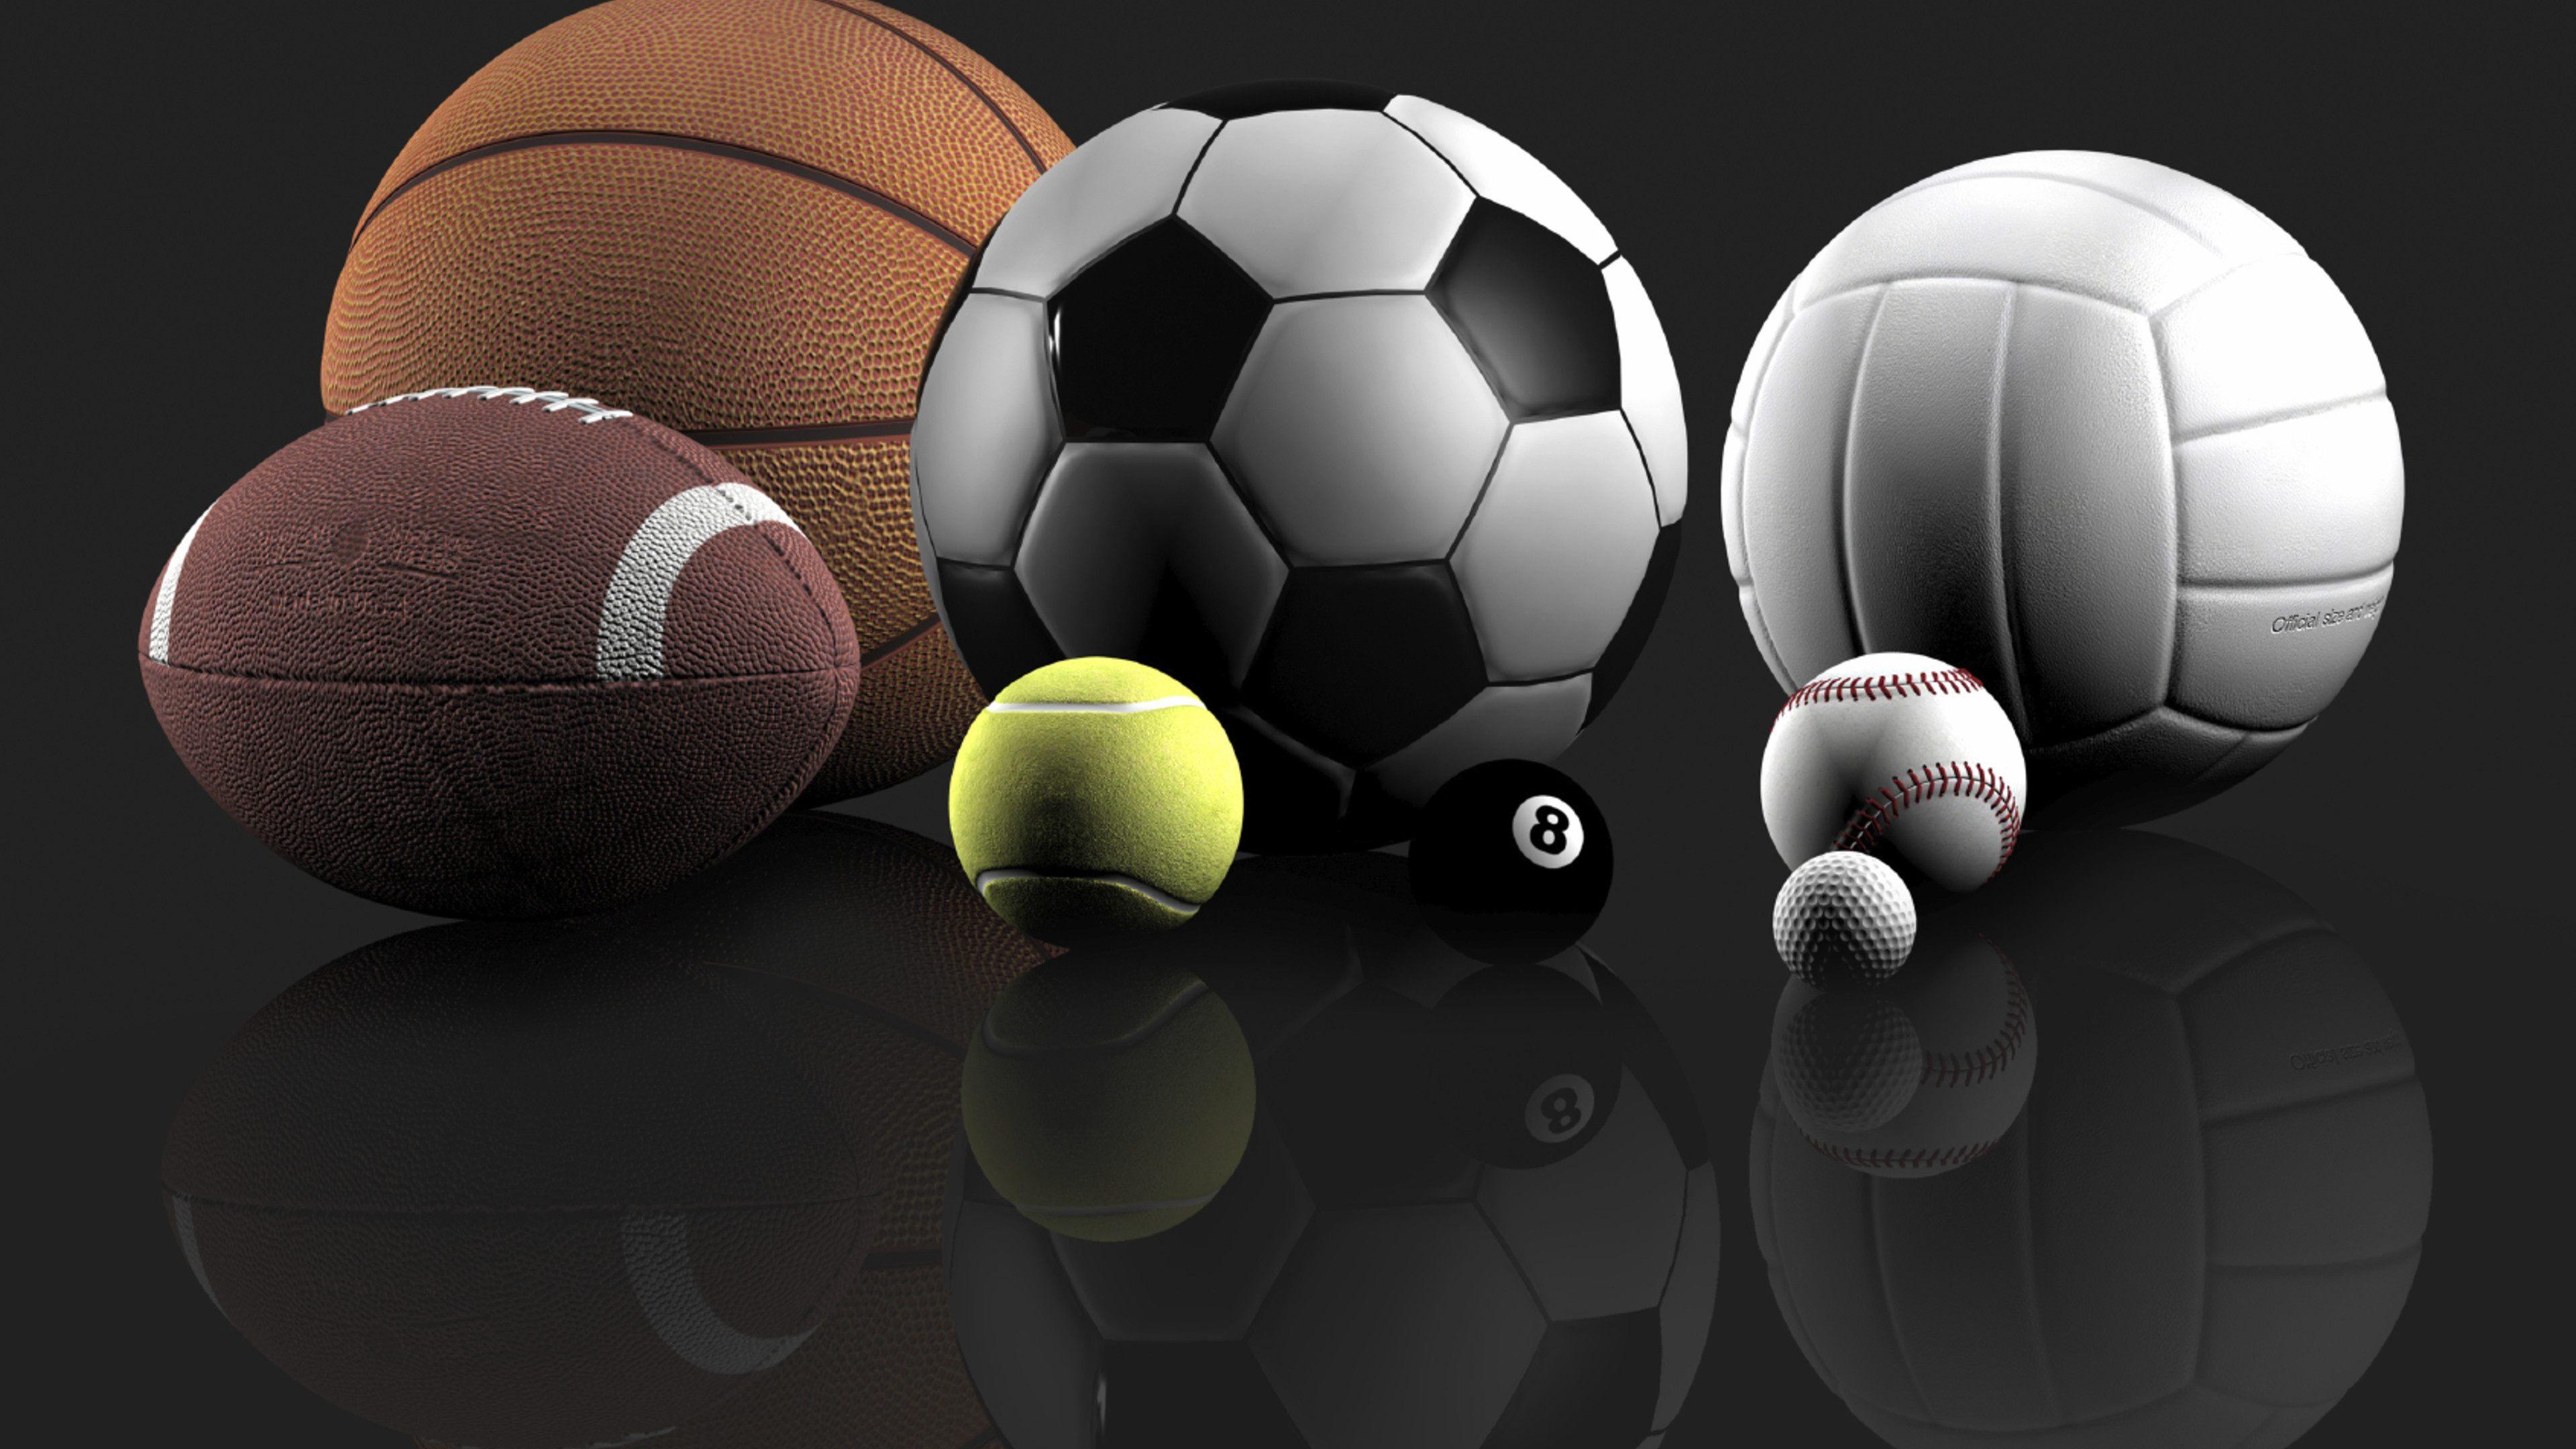 Ball Wallpaper HD Background, Image, Pics, Photo Free Download